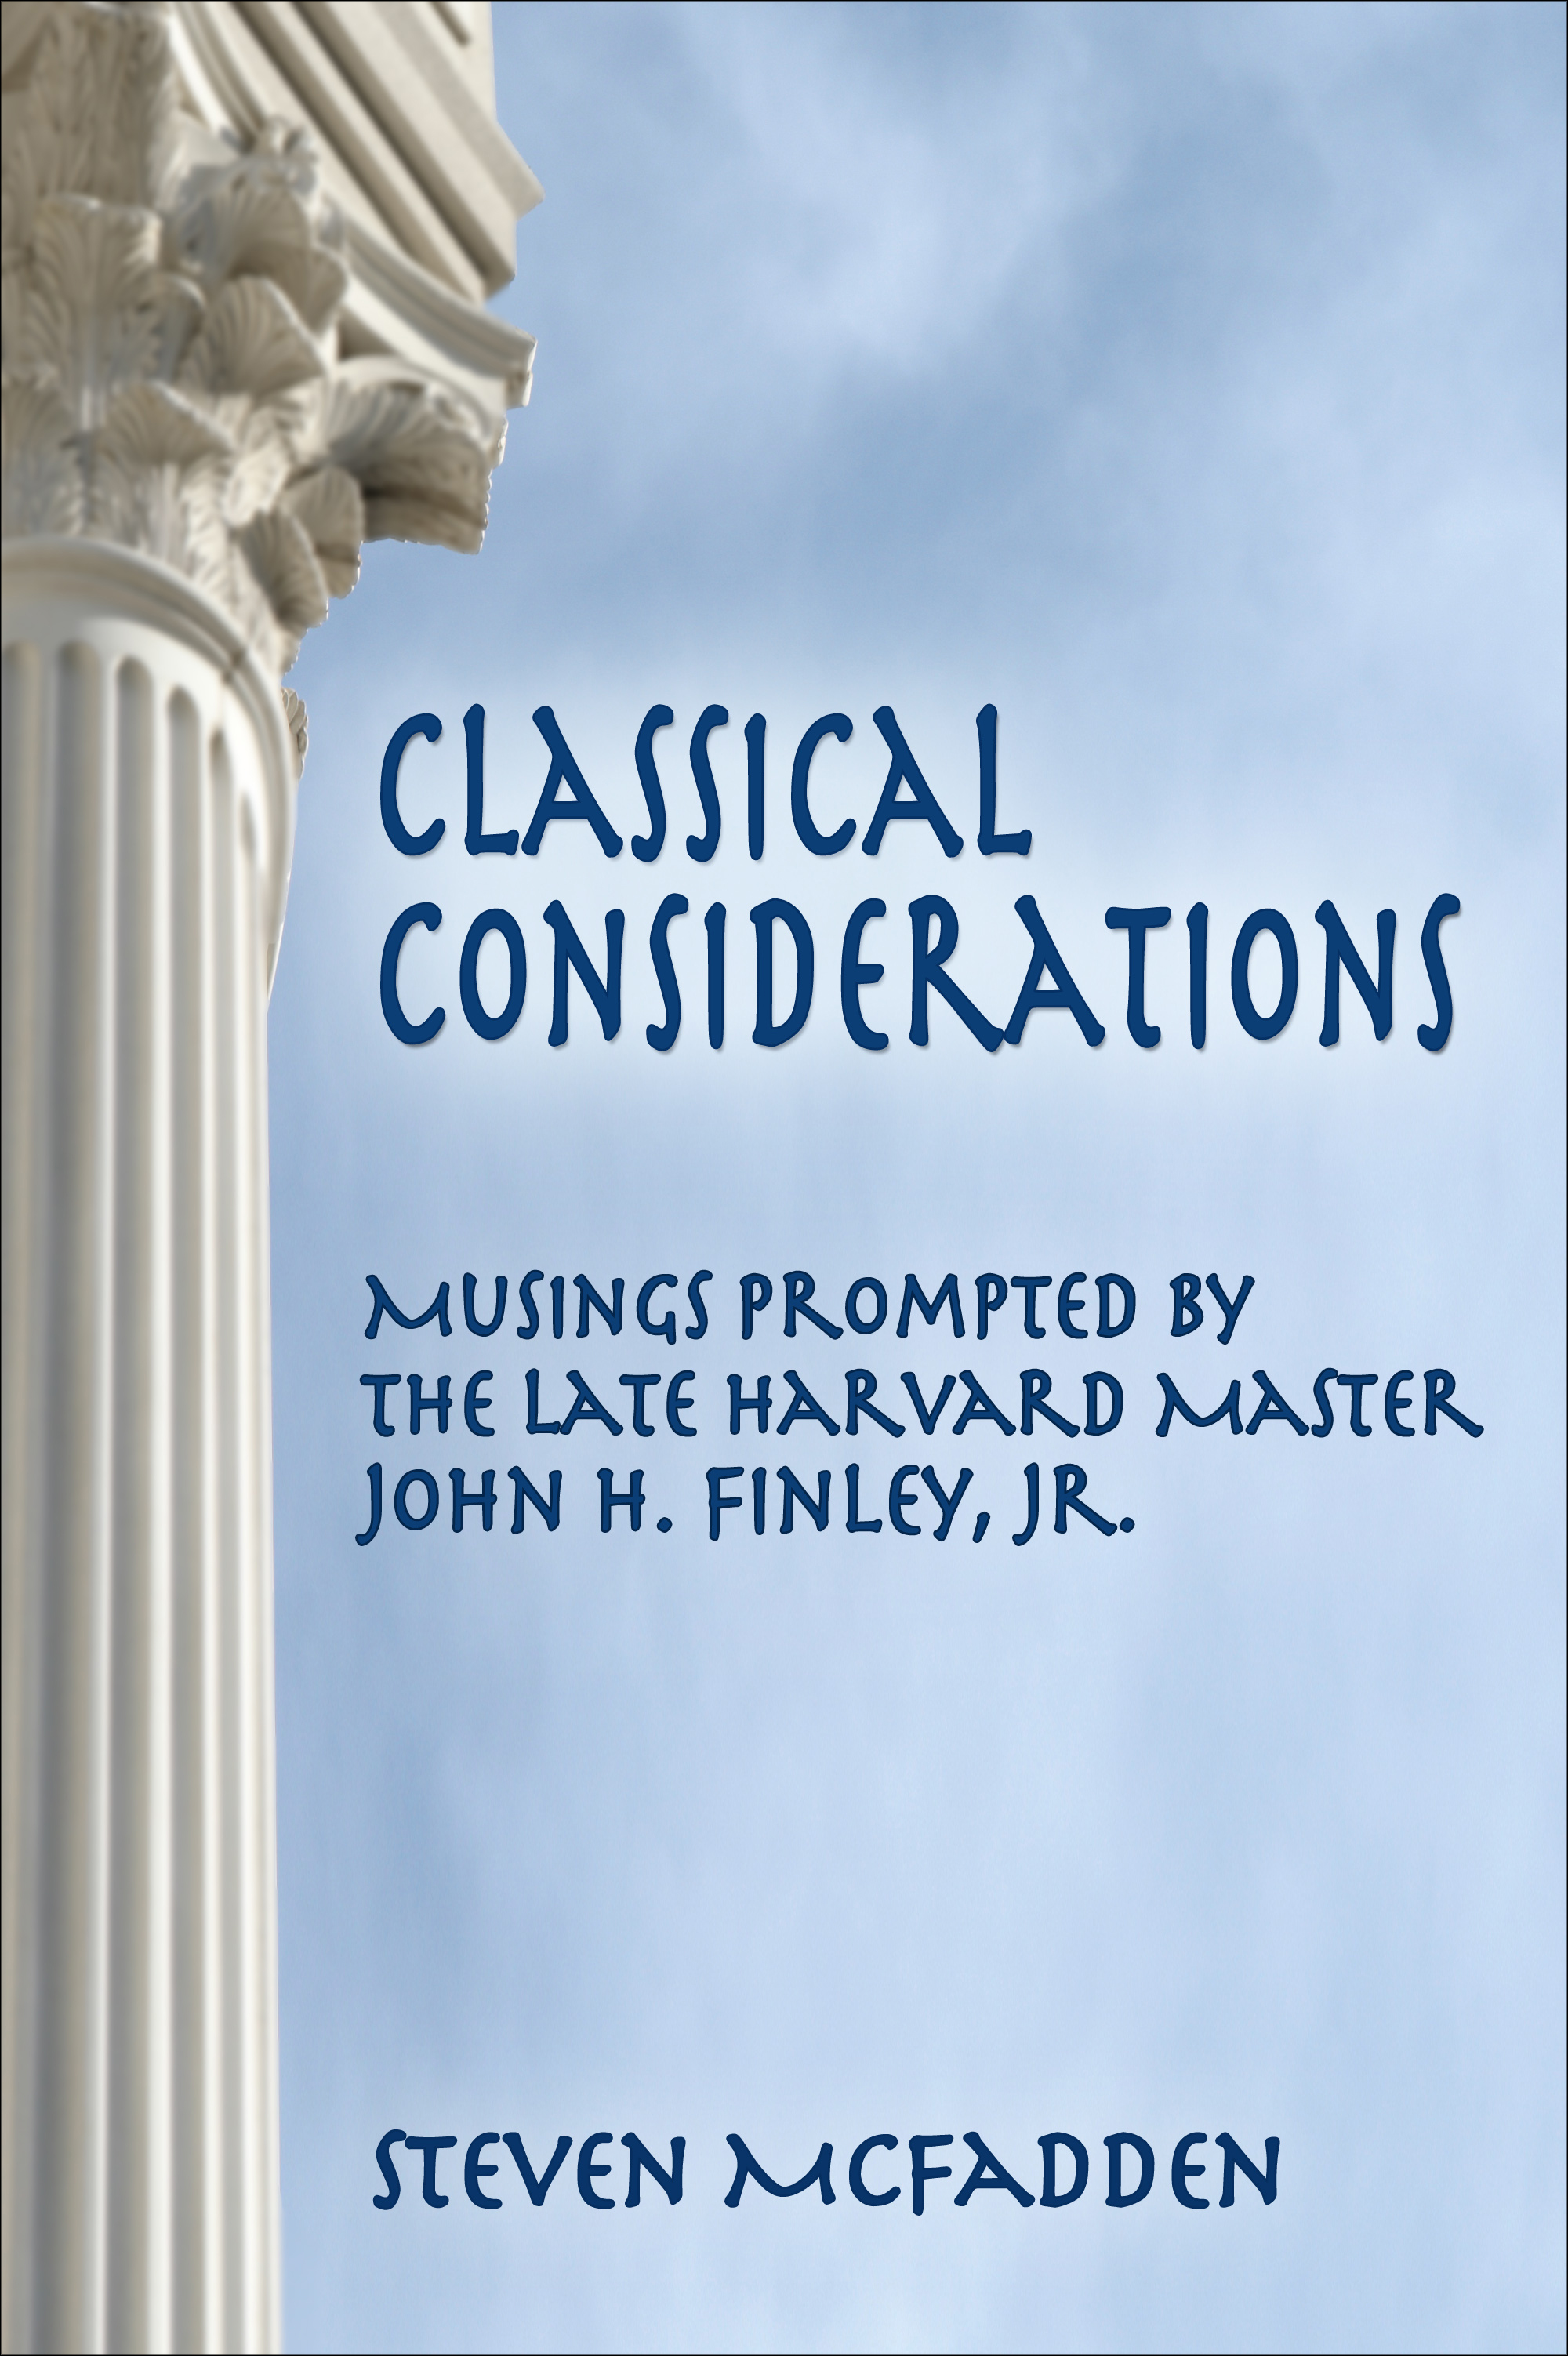 Classical Considerations: Musings Prompted by the Late John H. Finley, Jr."